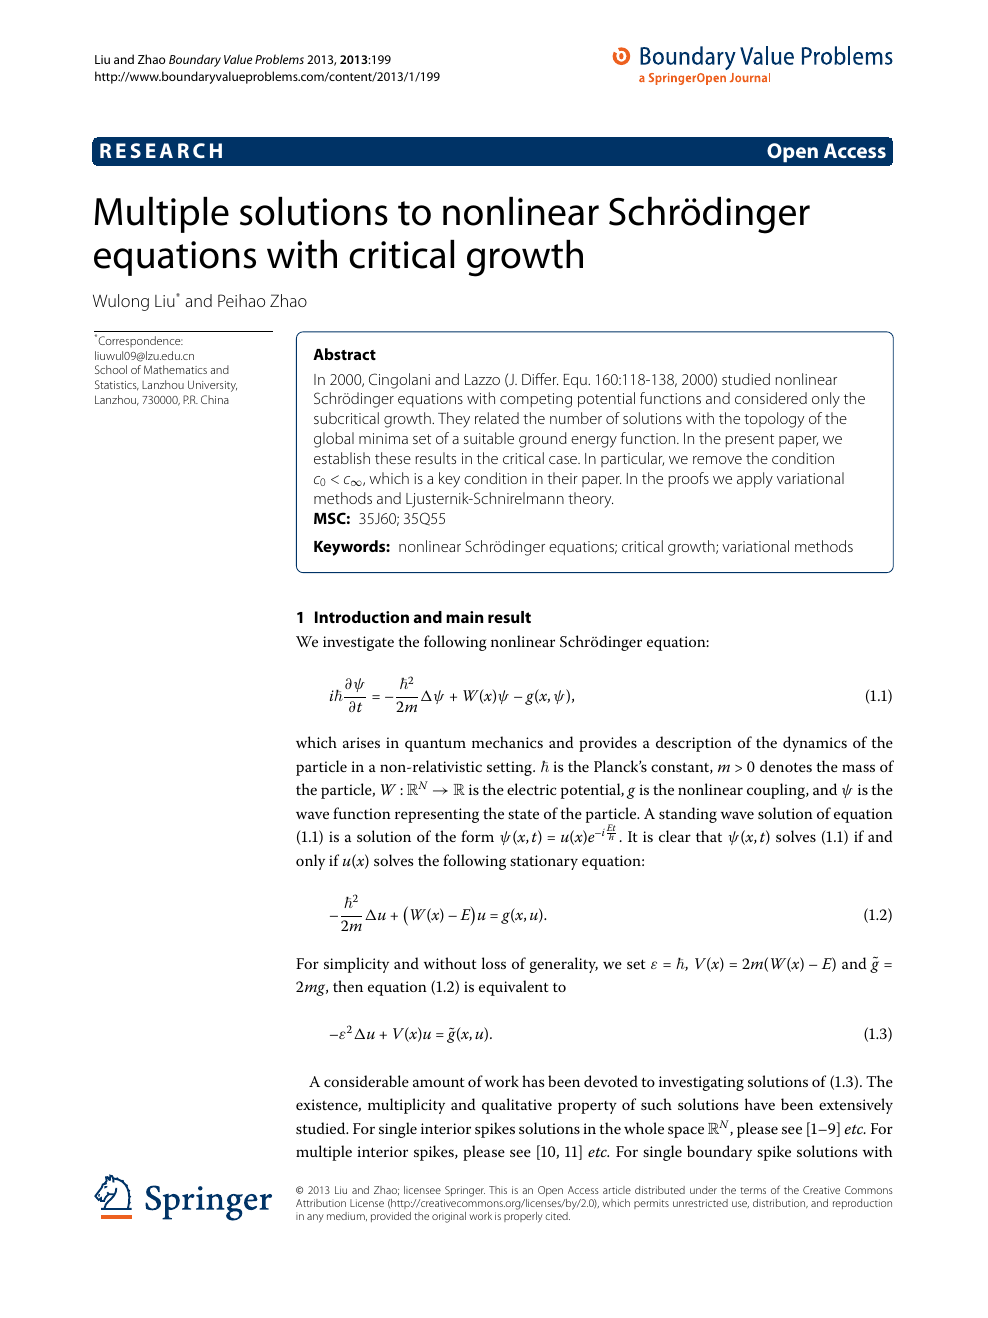 Multiple Solutions To Nonlinear Schrodinger Equations With Critical Growth Topic Of Research Paper In Mathematics Download Scholarly Article Pdf And Read For Free On Cyberleninka Open Science Hub